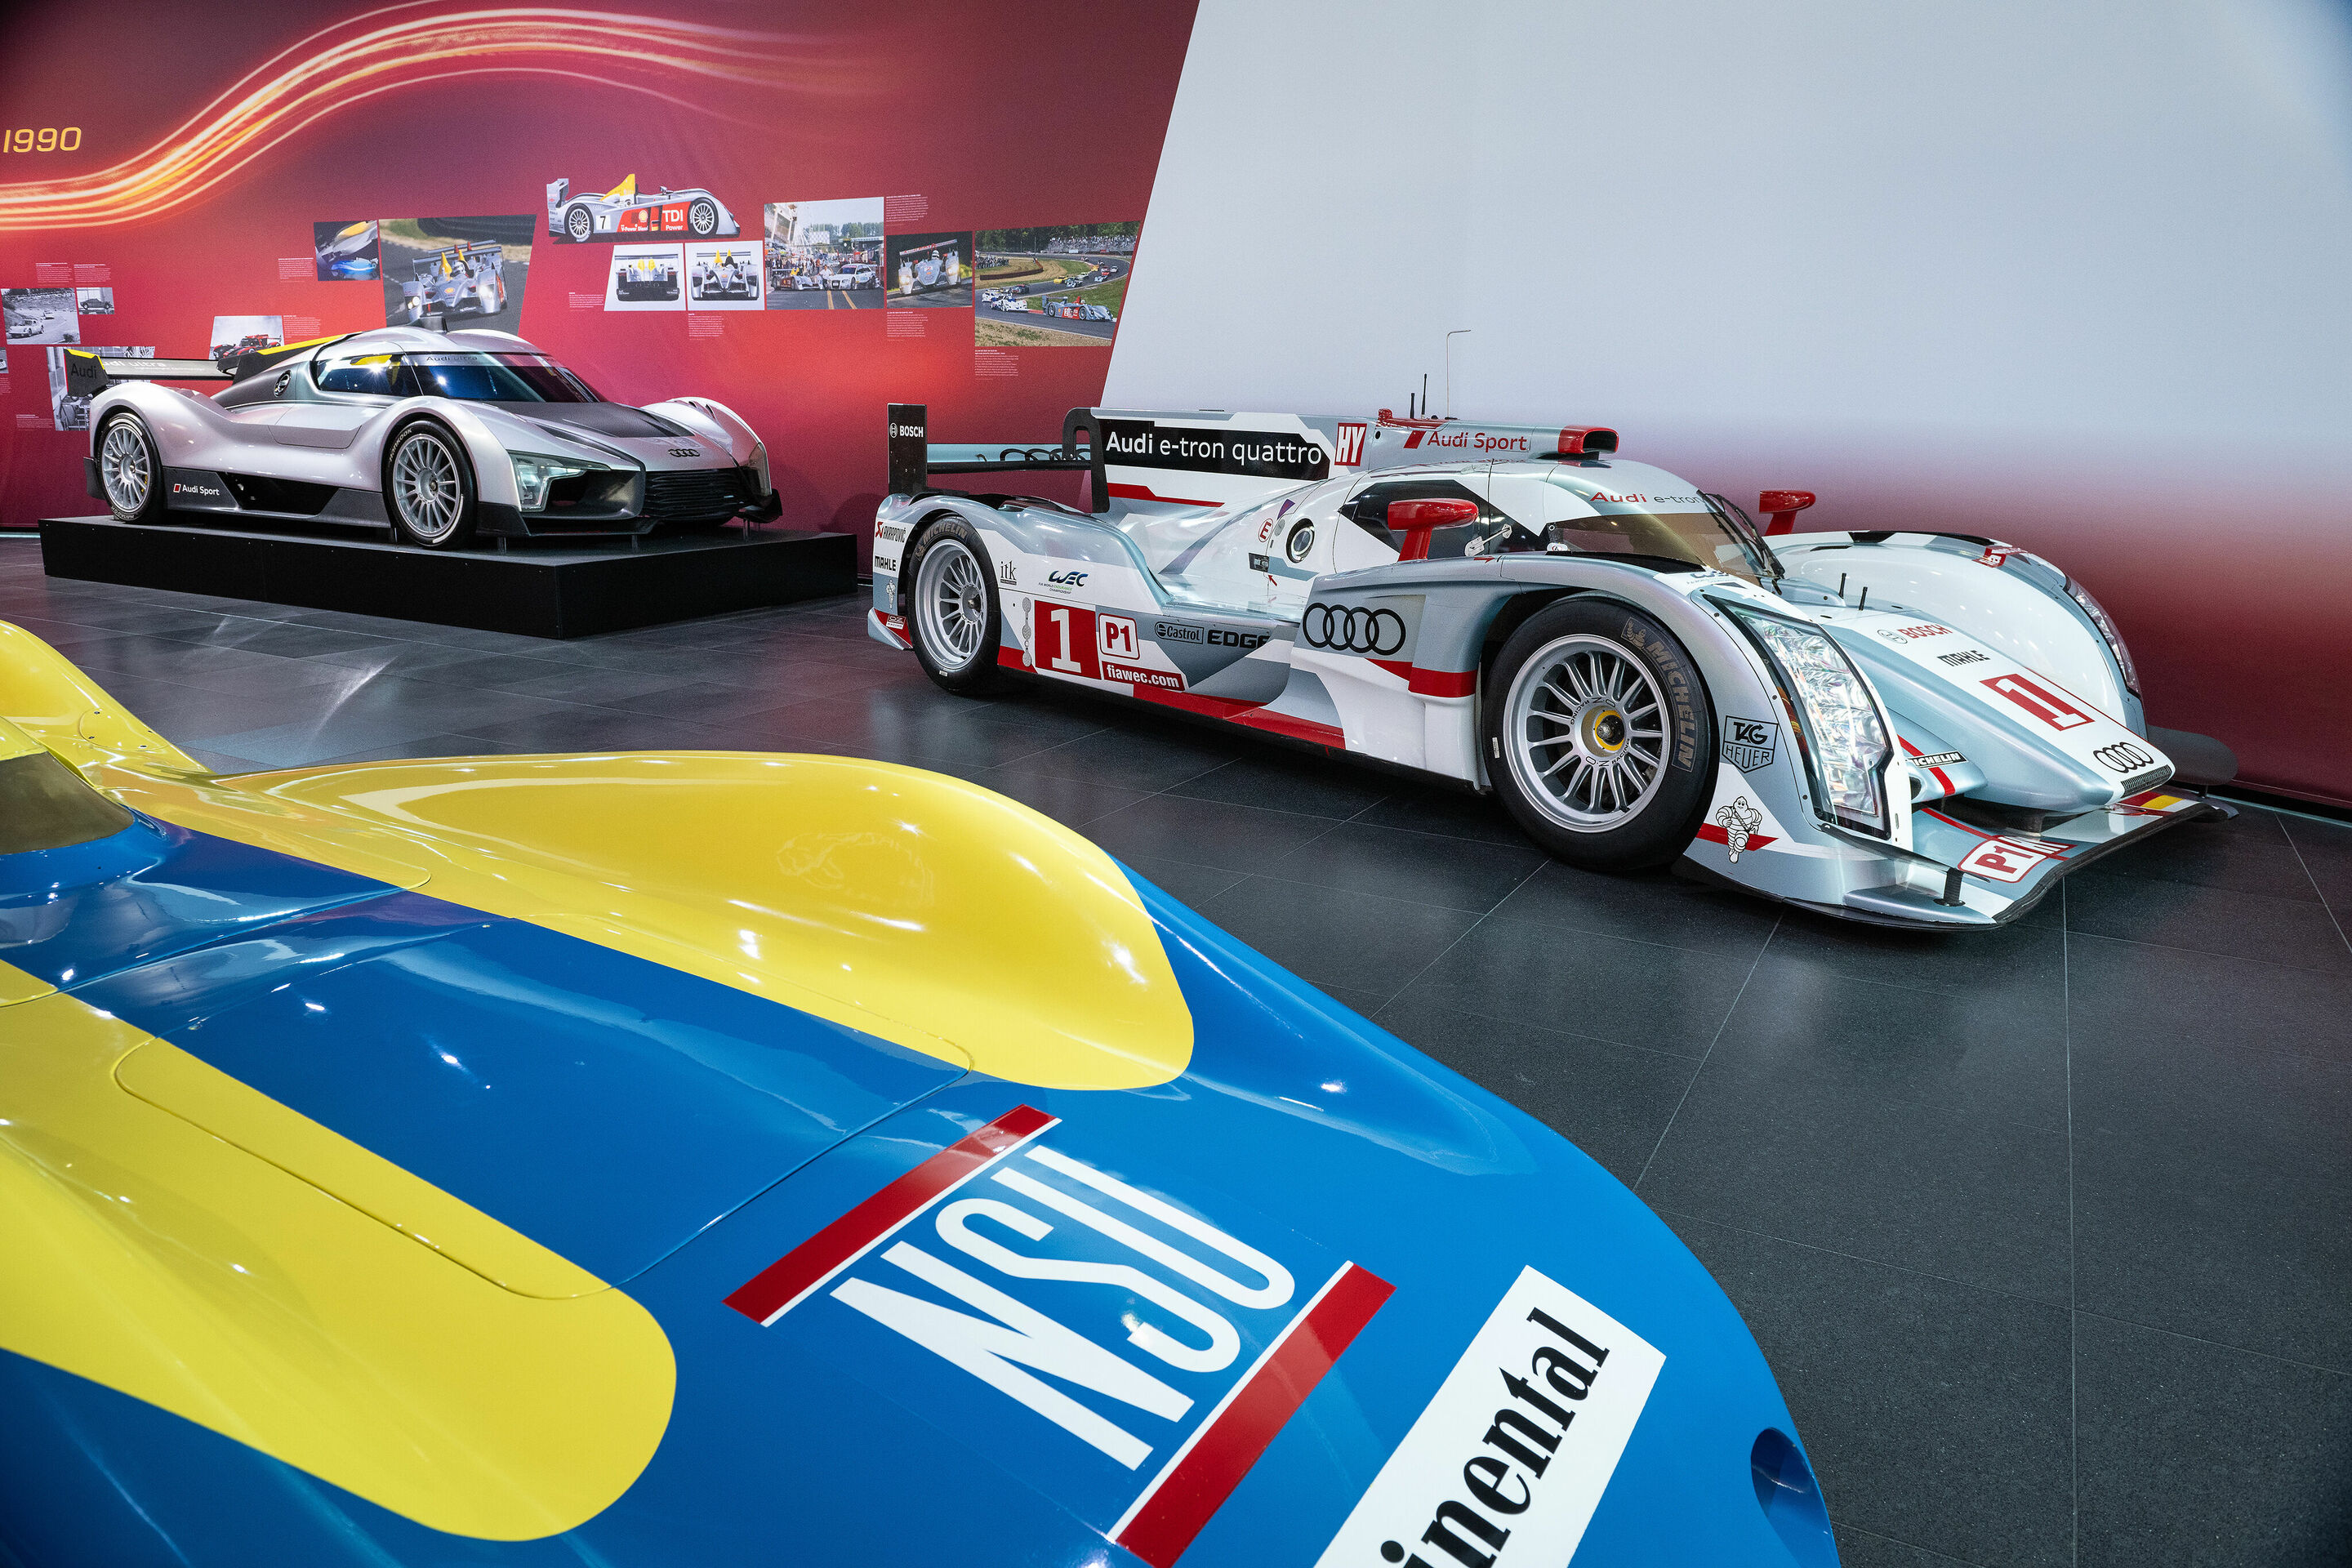 After “Windschnittig” comes “Form vollendet”: A new special exhibition at the Audi museum mobile